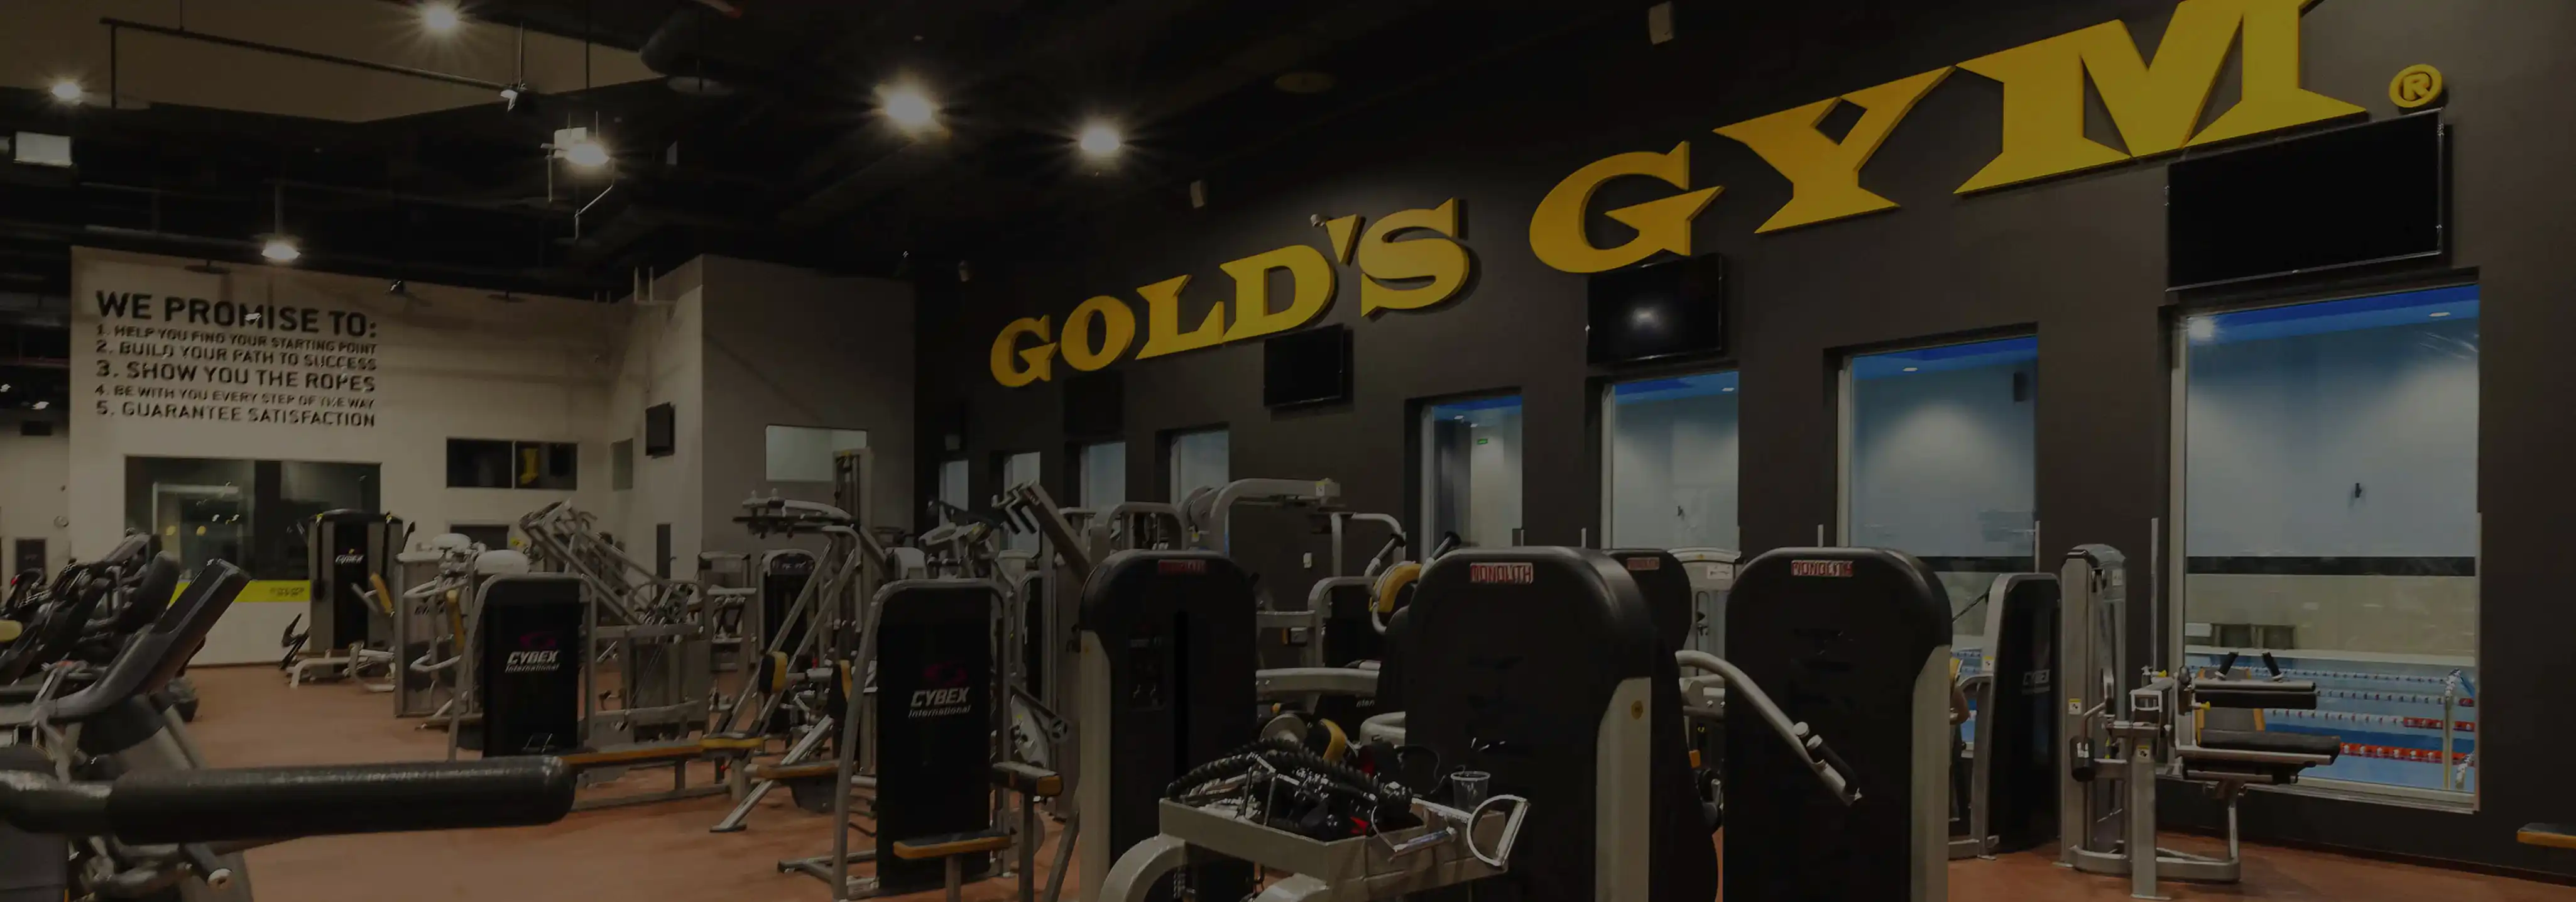 Gym Branding: Top Key Trends to Guide Your Efforts